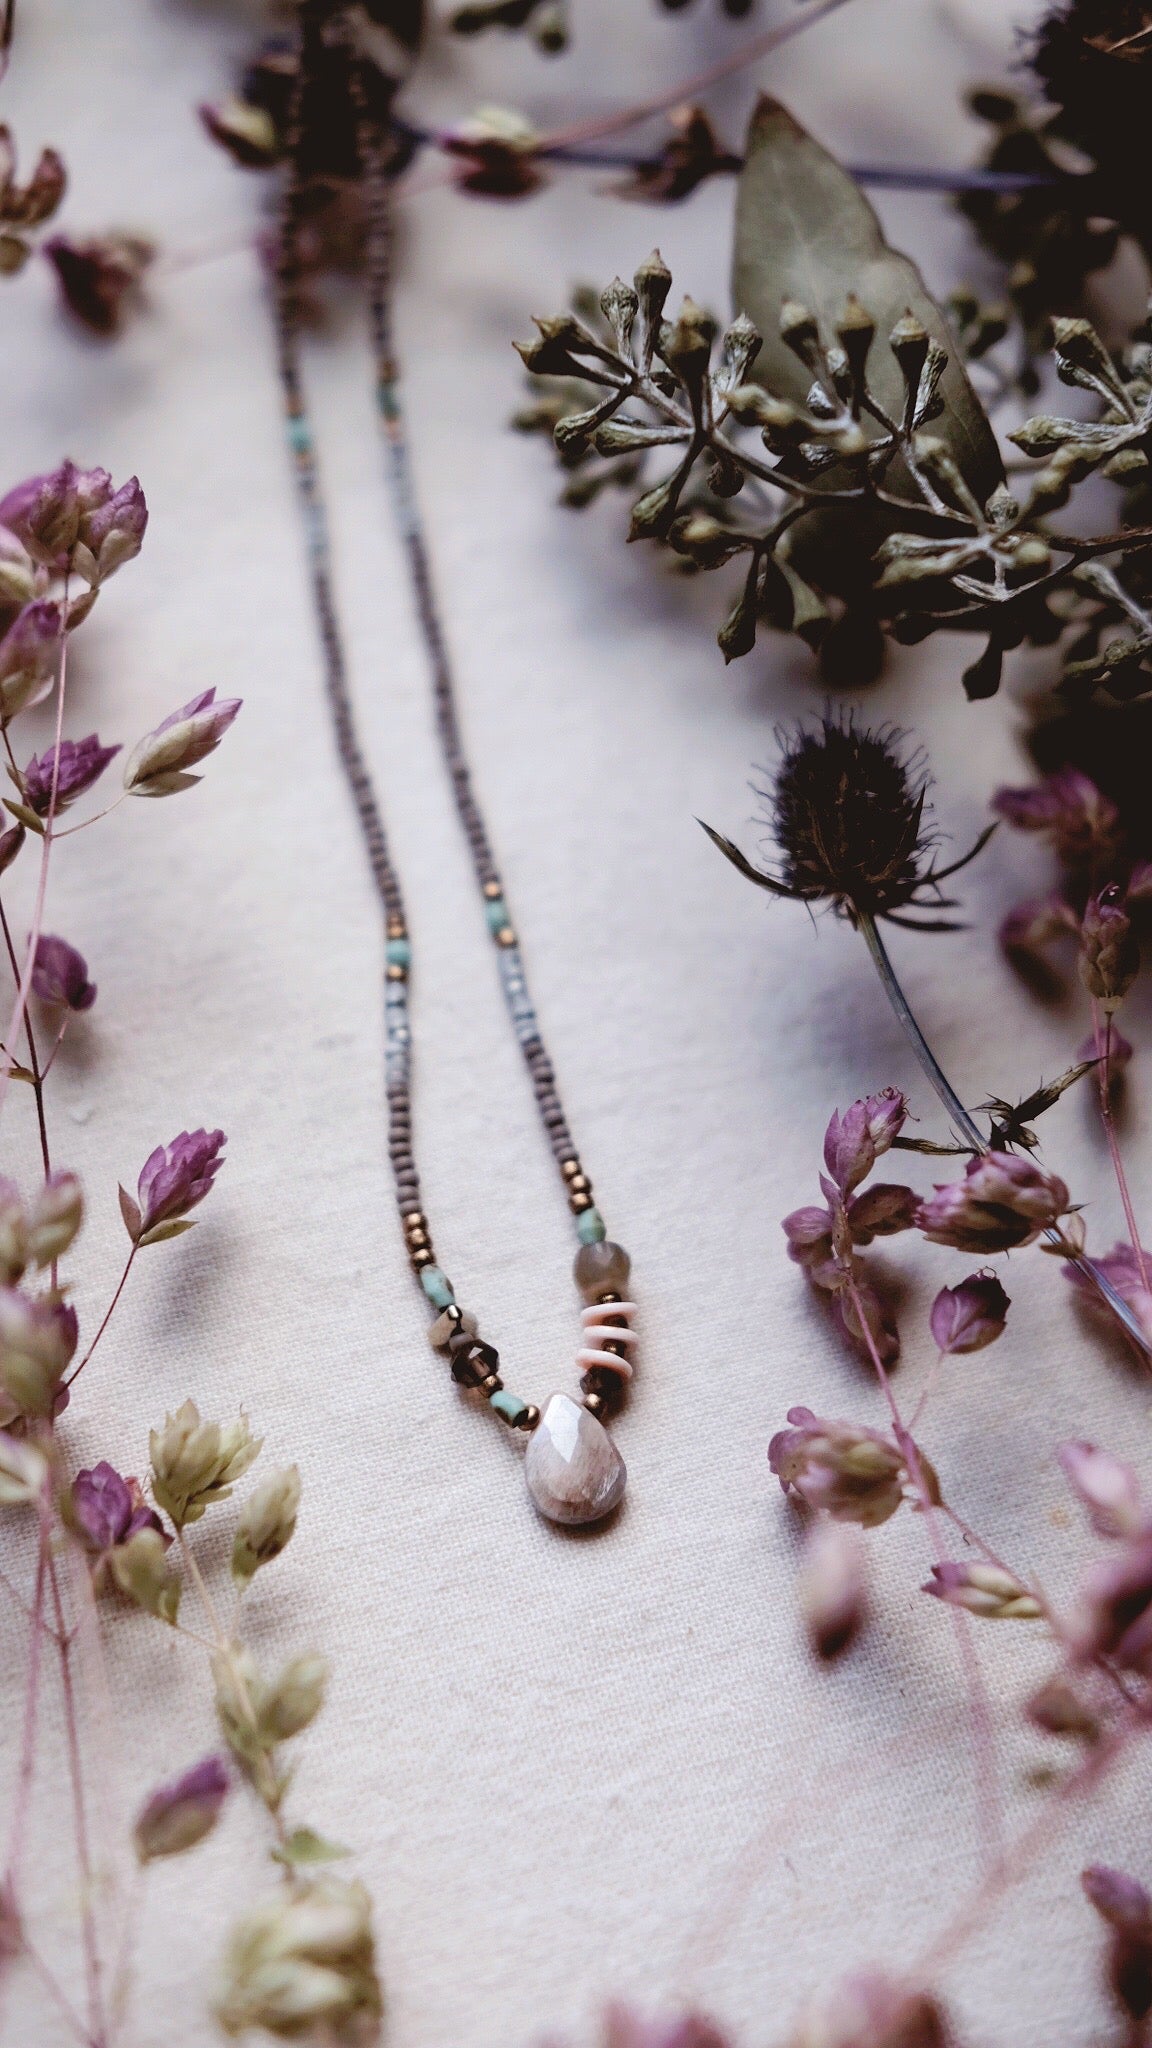 The Seer + Chalcedony + Moonstone + Pyrite necklace